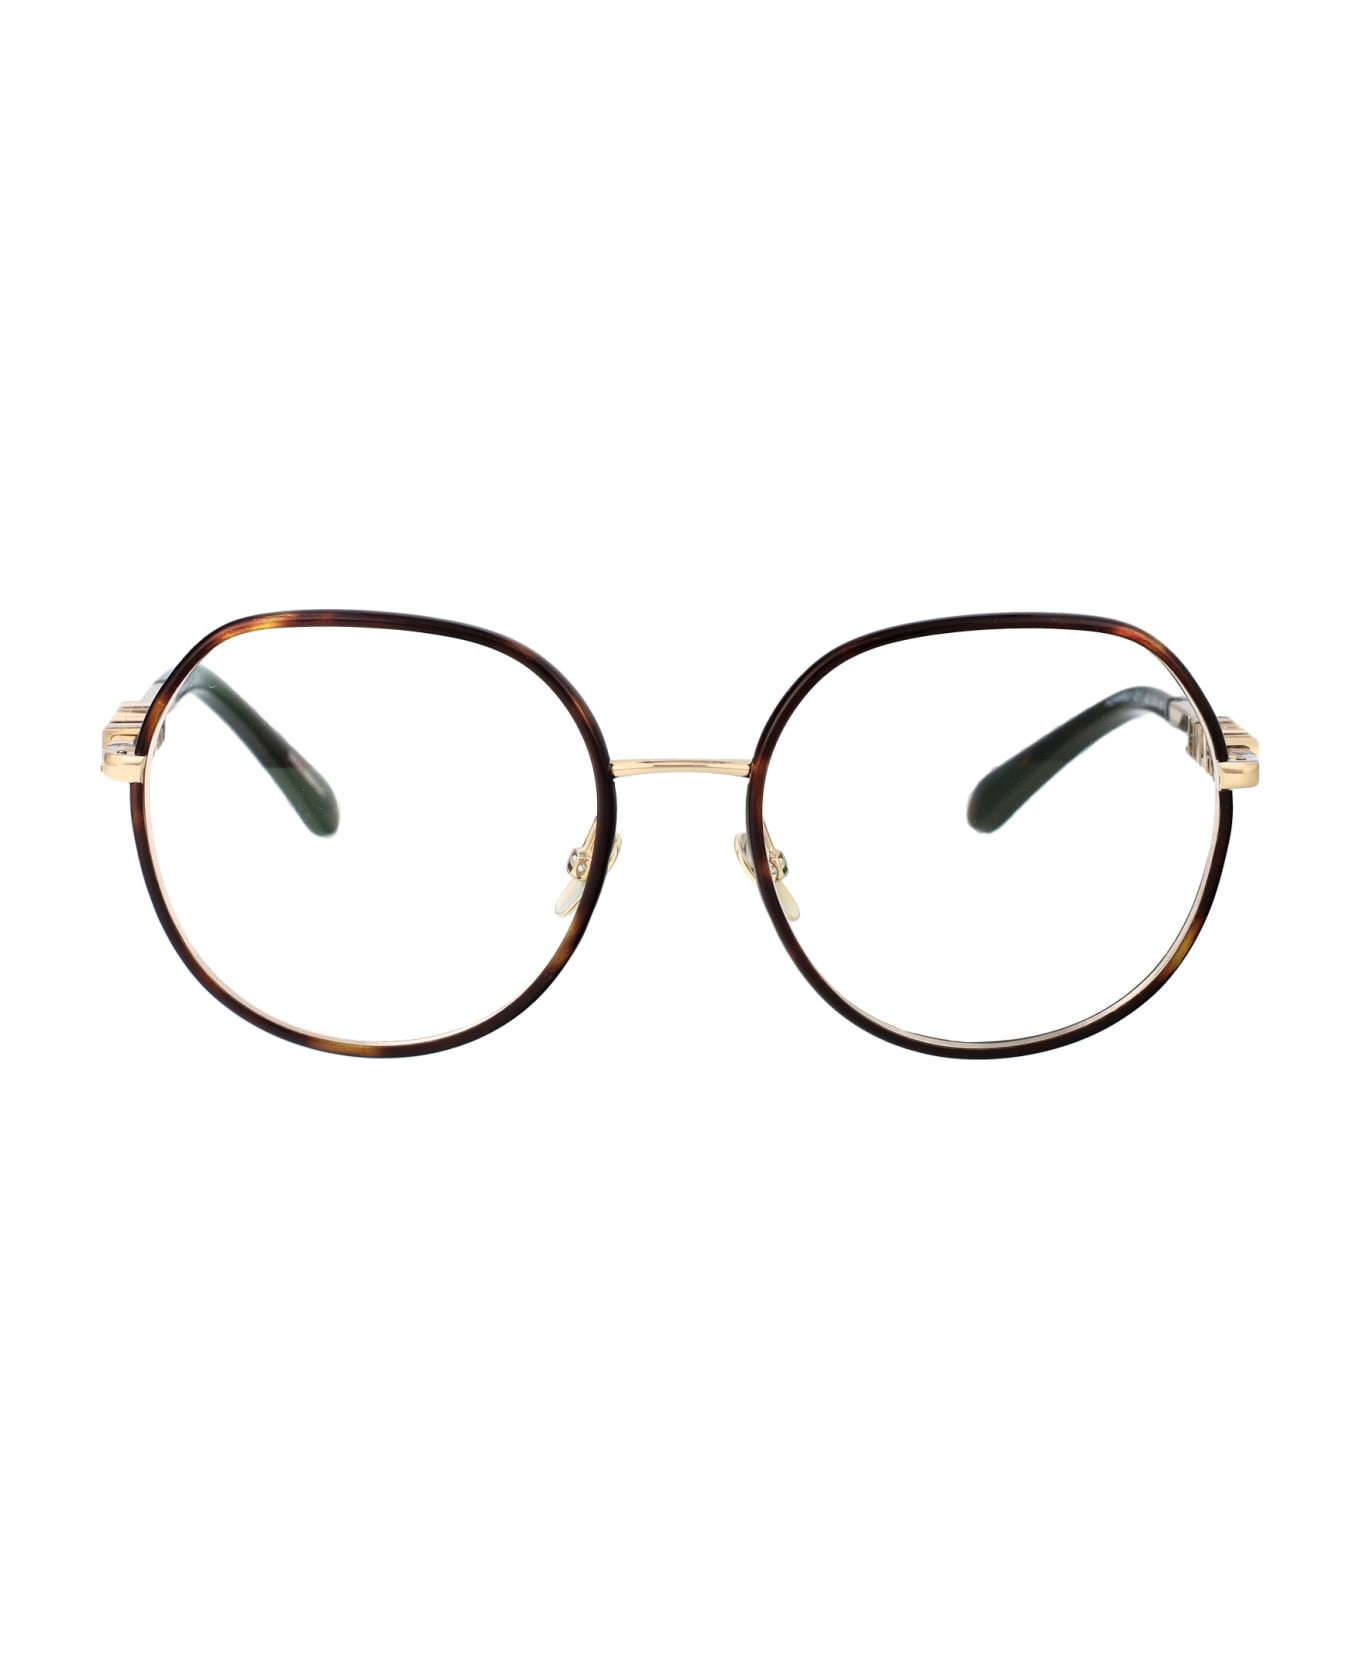 Chanel 0ch2213 Glasses - C429 BROWN